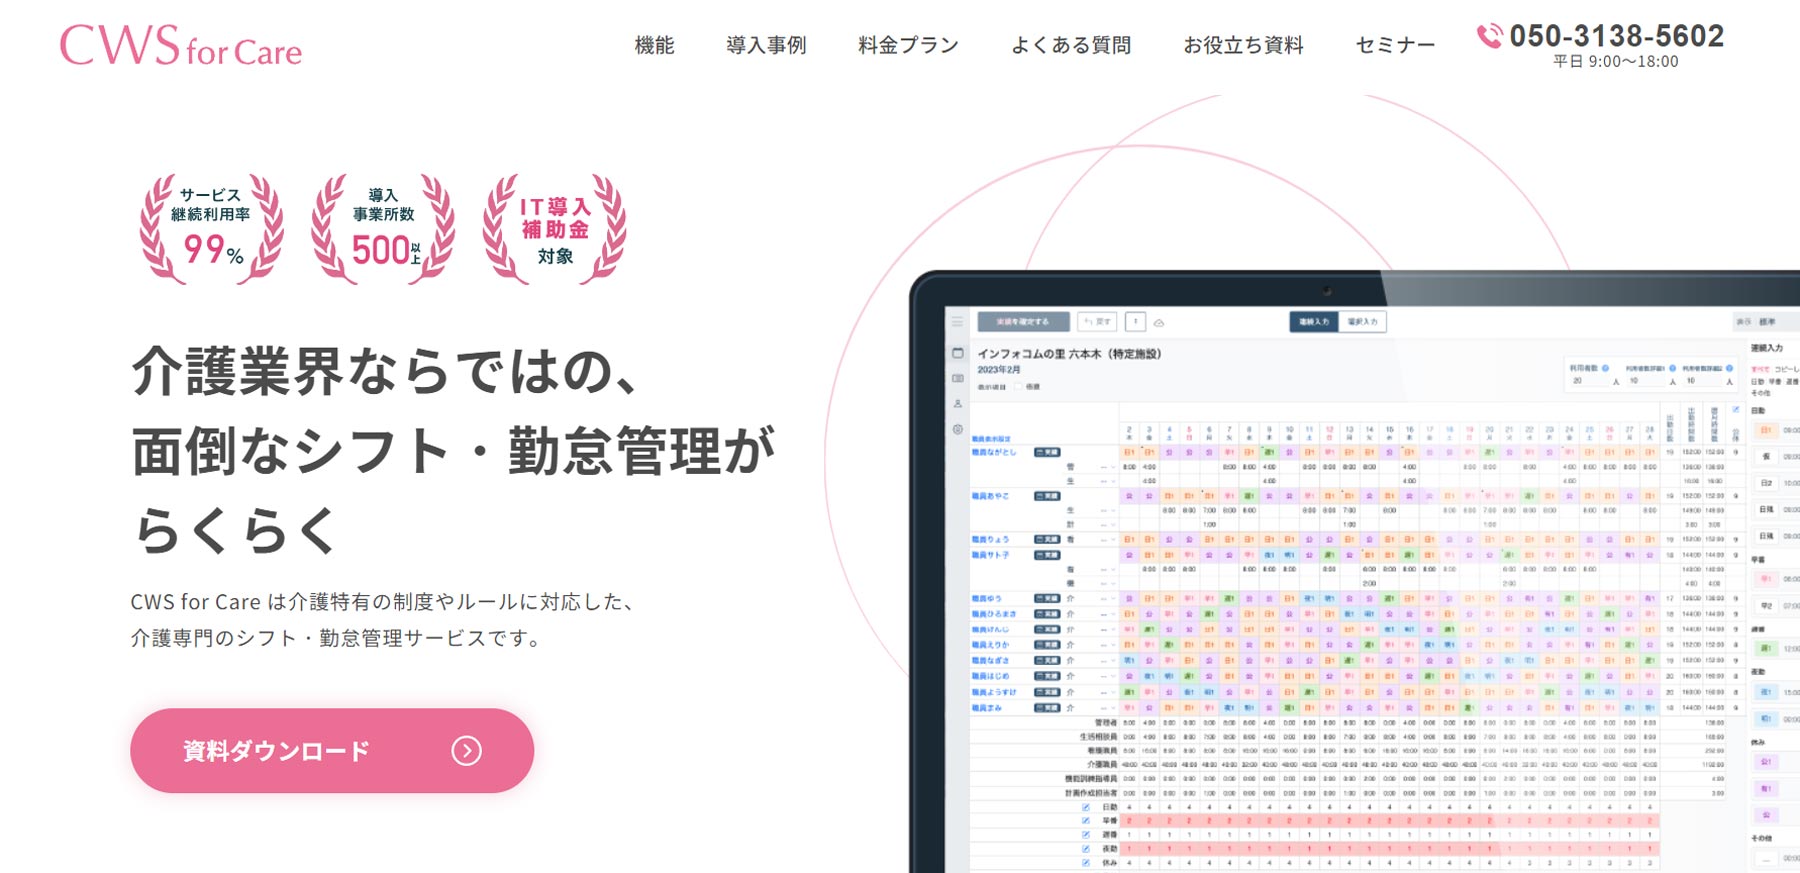 CWS for Care公式Webサイト